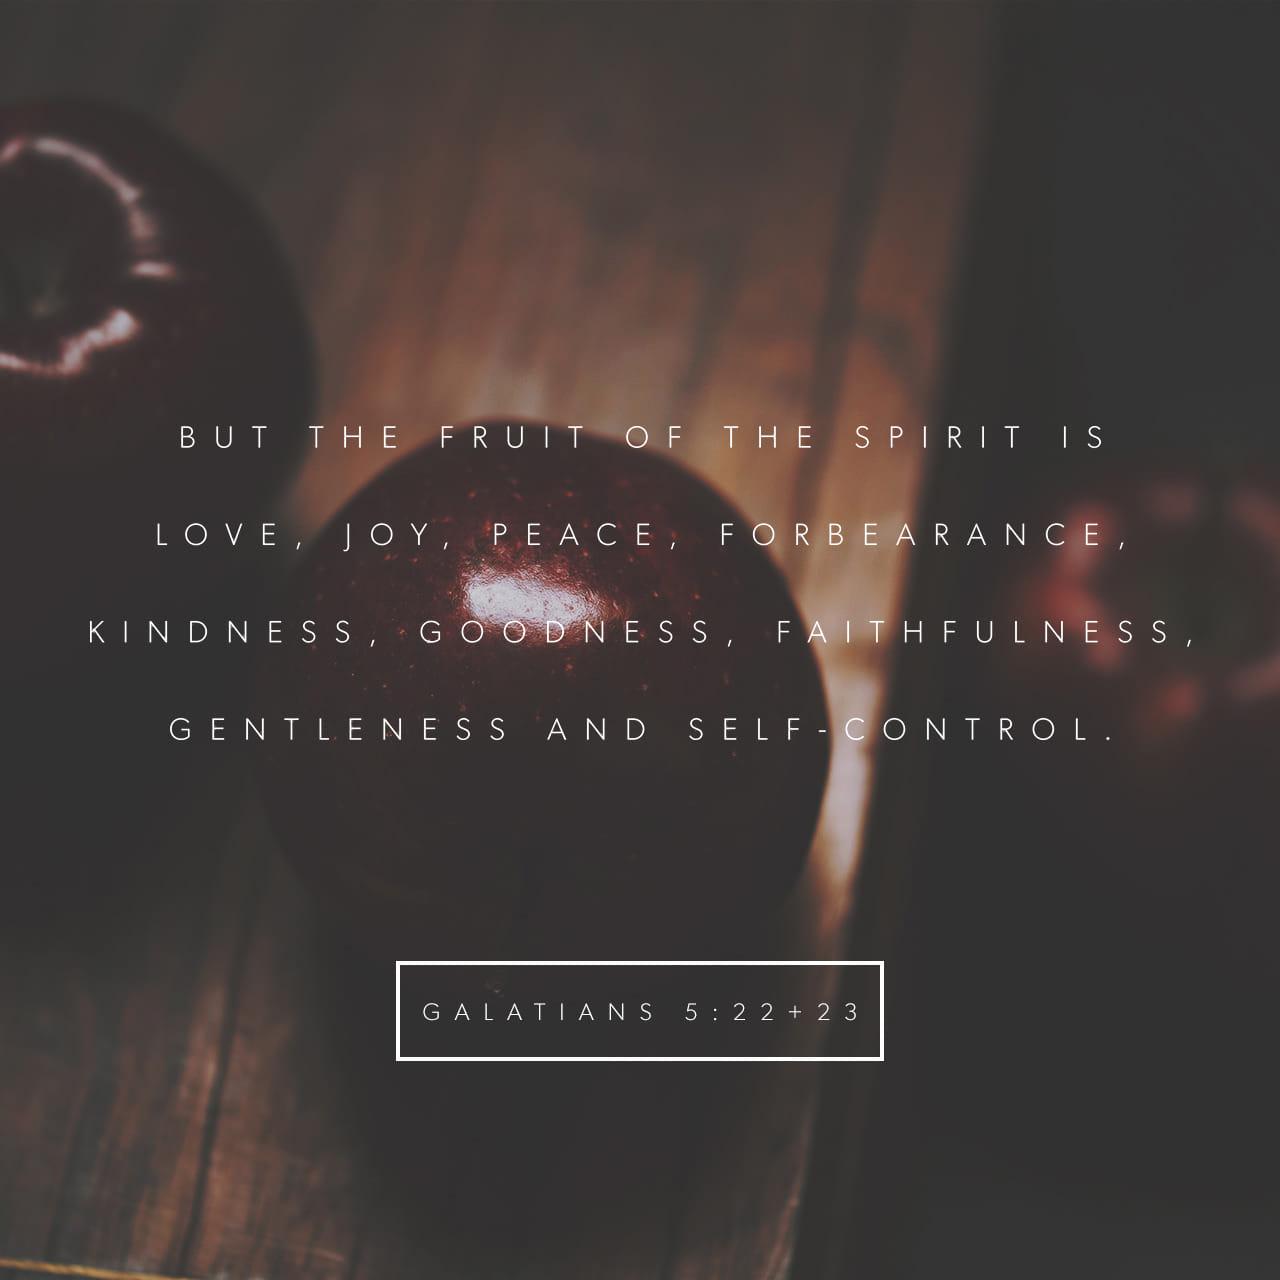 Bible Verse of the Day - day 88 - image 529 (Galatians 5:22)